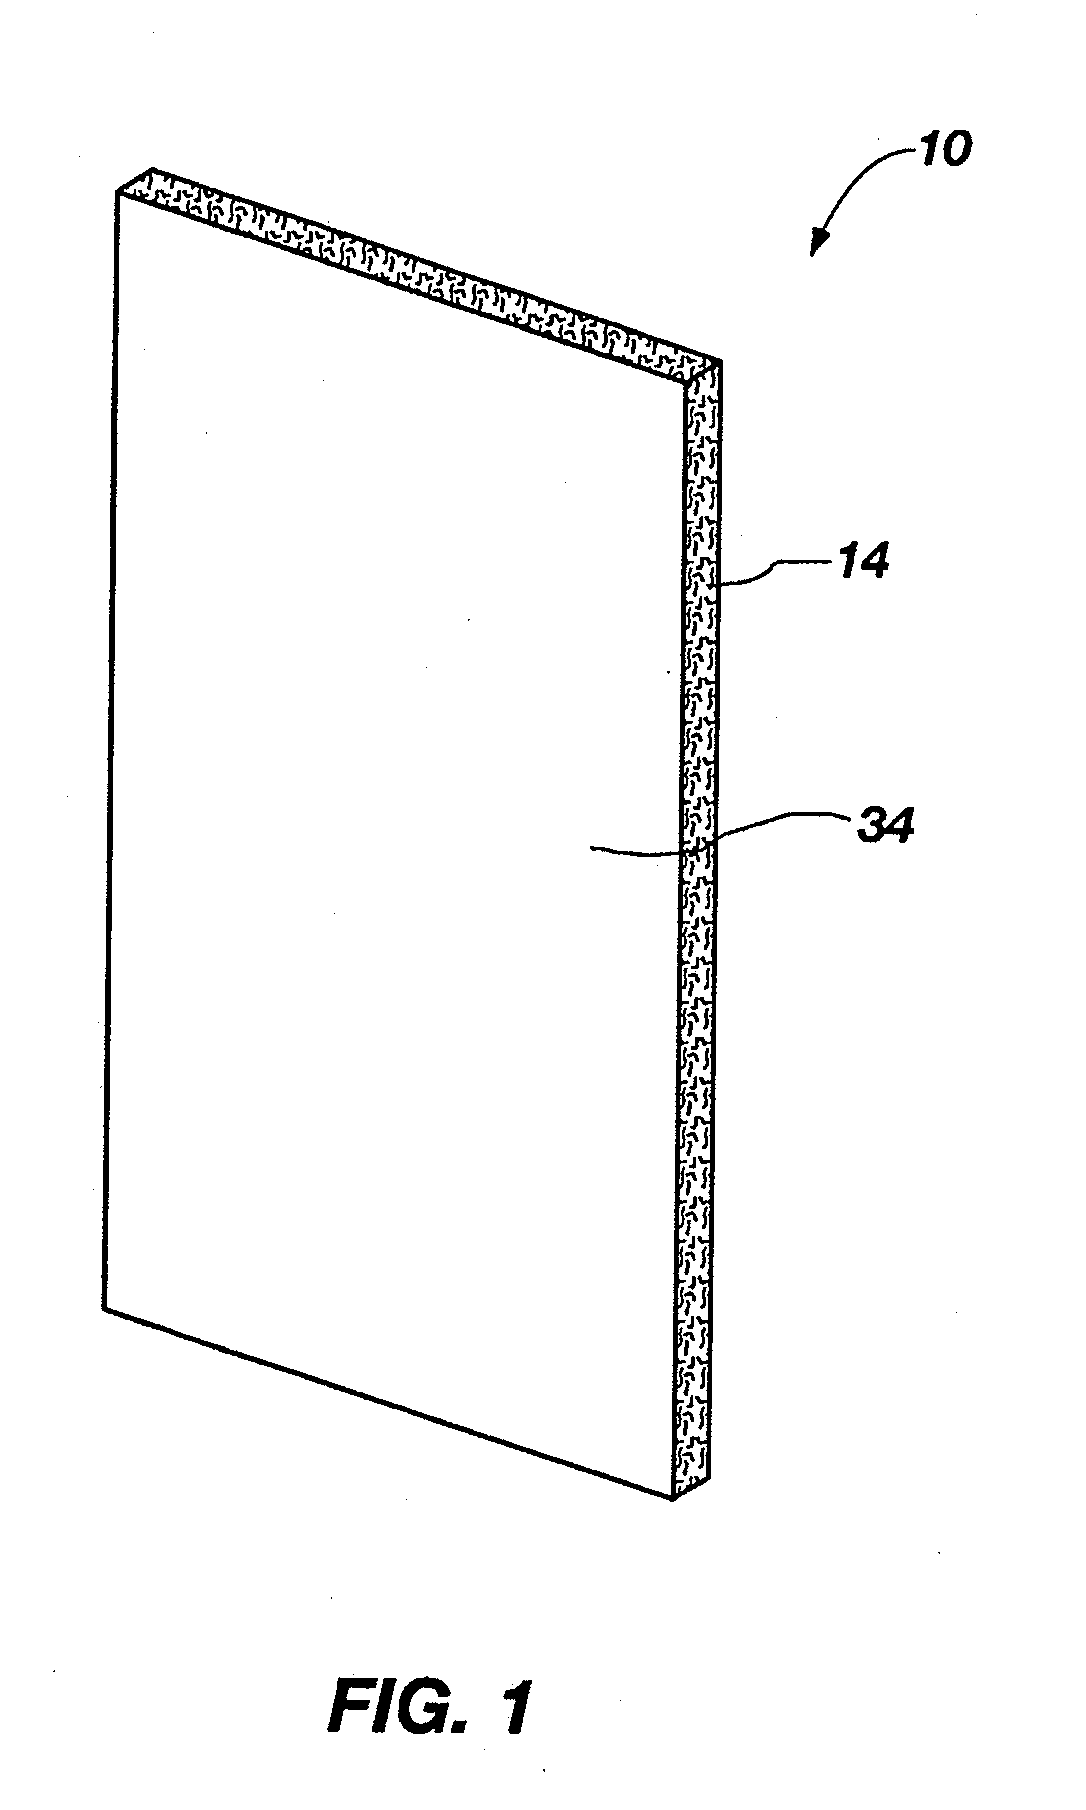 Utility materials incorporating a microparticle matrix formed with a setting agent